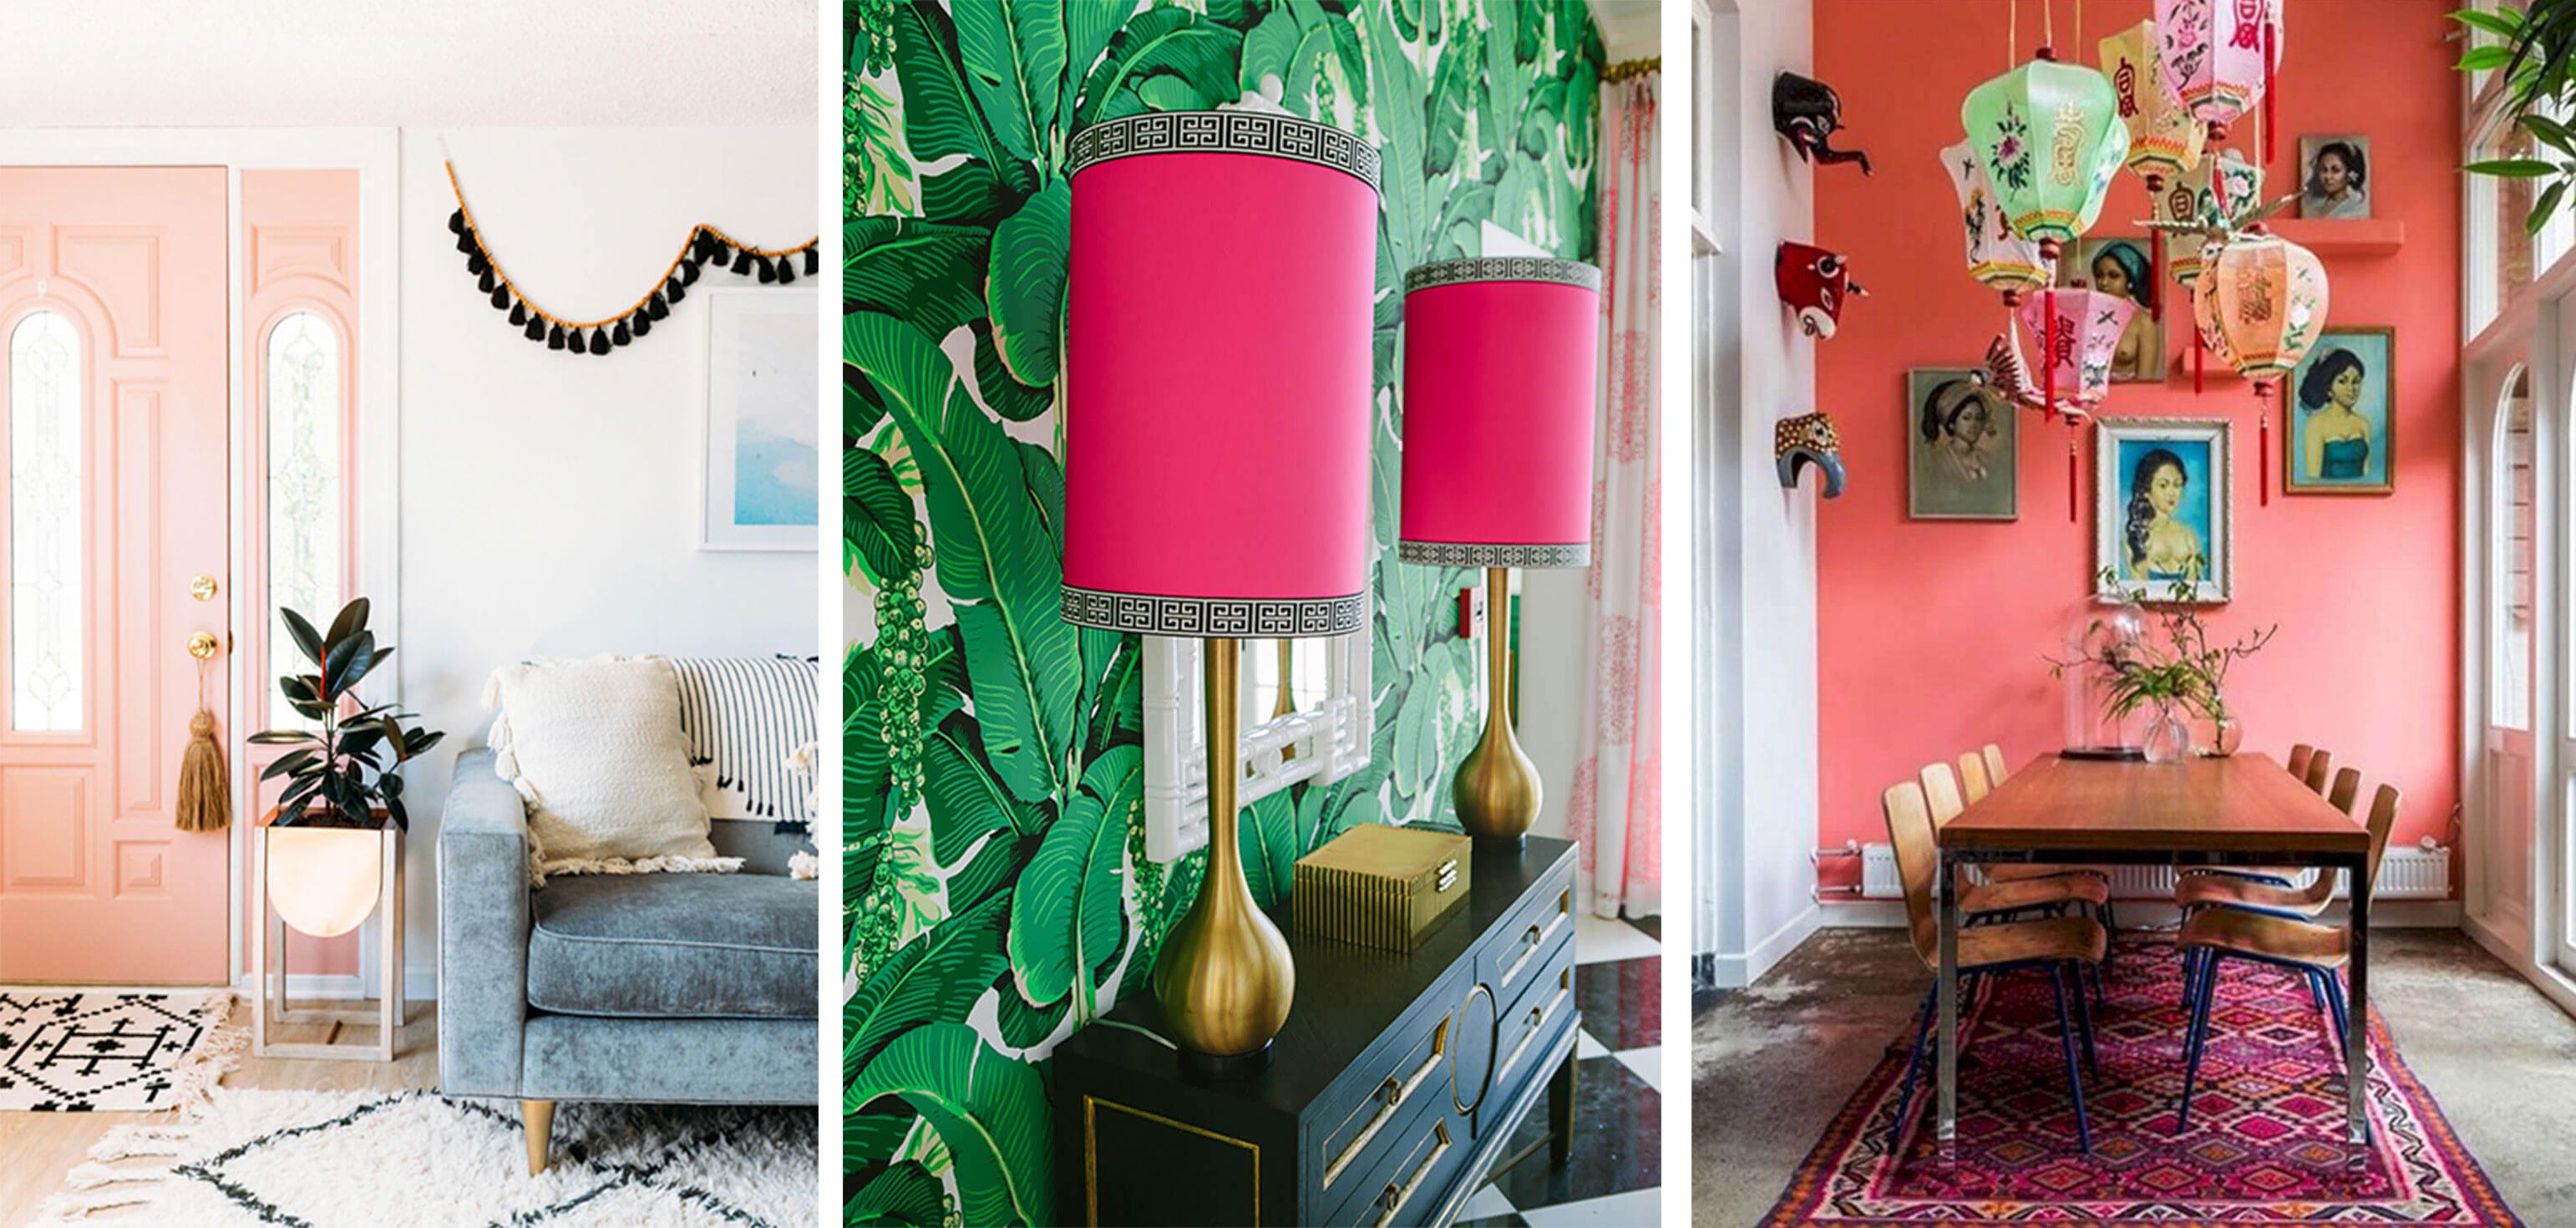 Different shades of pink evoking different moods in living spaces
 